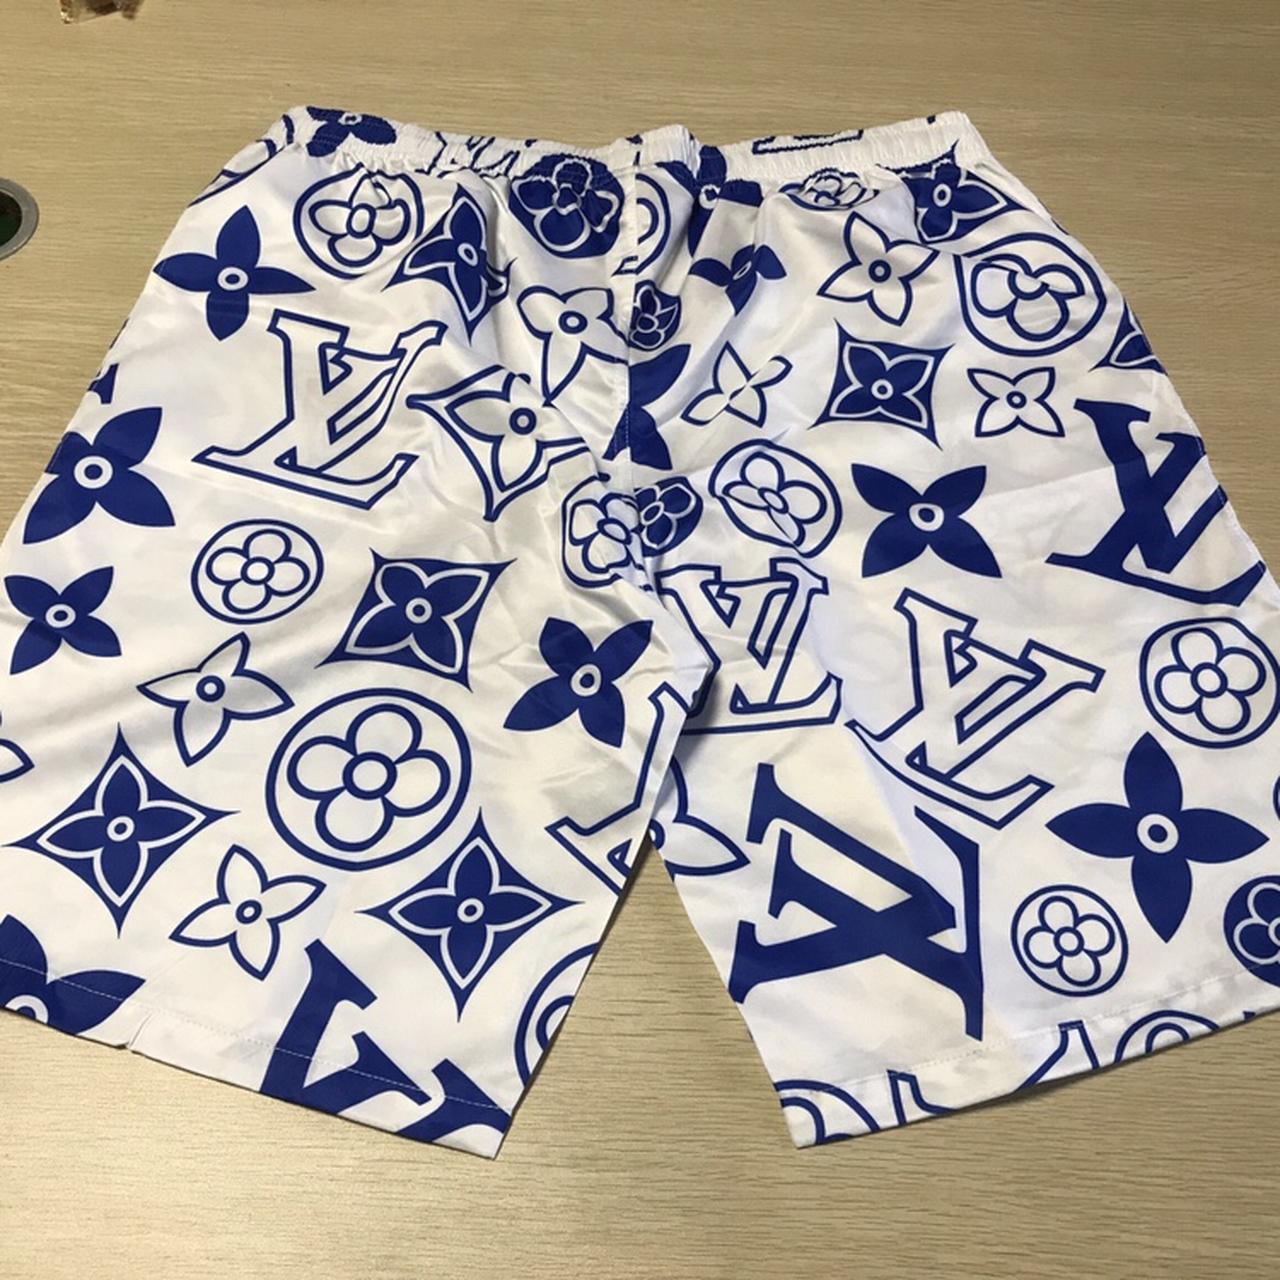 Imran Potato Lv Shorts Fancy , Sold out in 30 Seconds